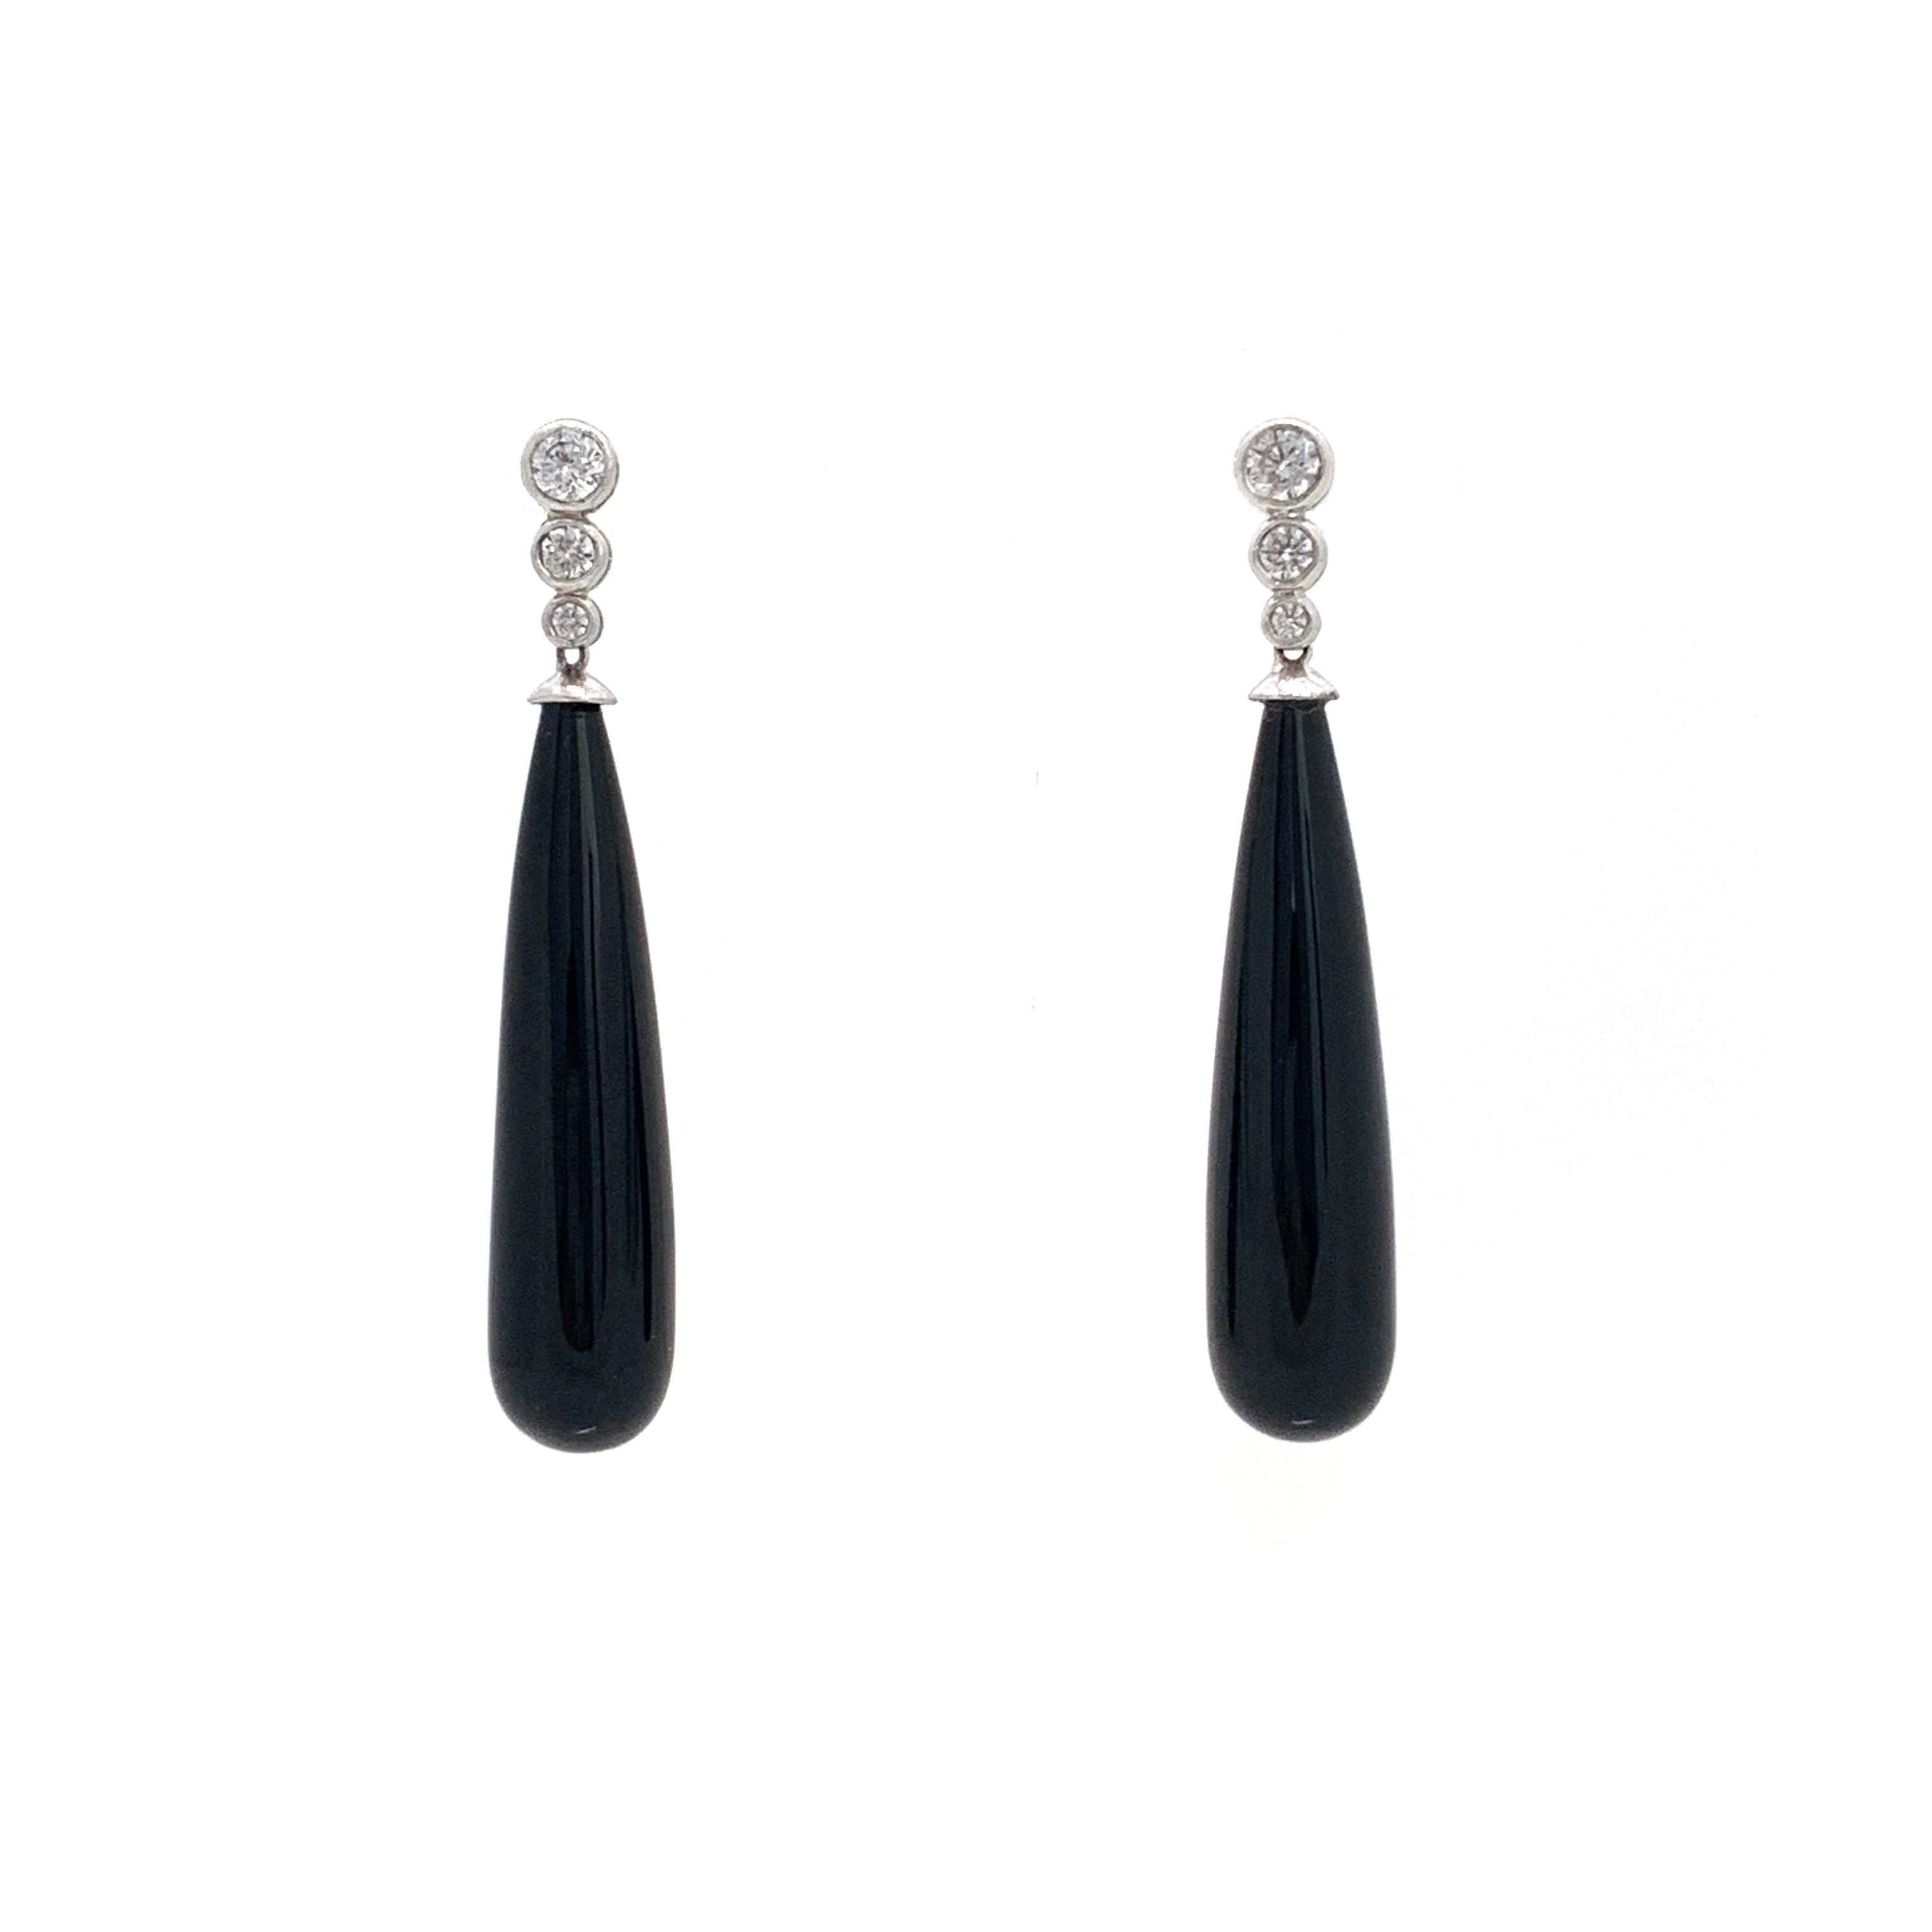 Art Deco style elongate teardrop Onyx earrings. The earrings features teardrop black onyx and faux diamond cubic zirconia adorned in art deco style - with platinum rhodium plated over sterling silver. Straight post with large friction back for